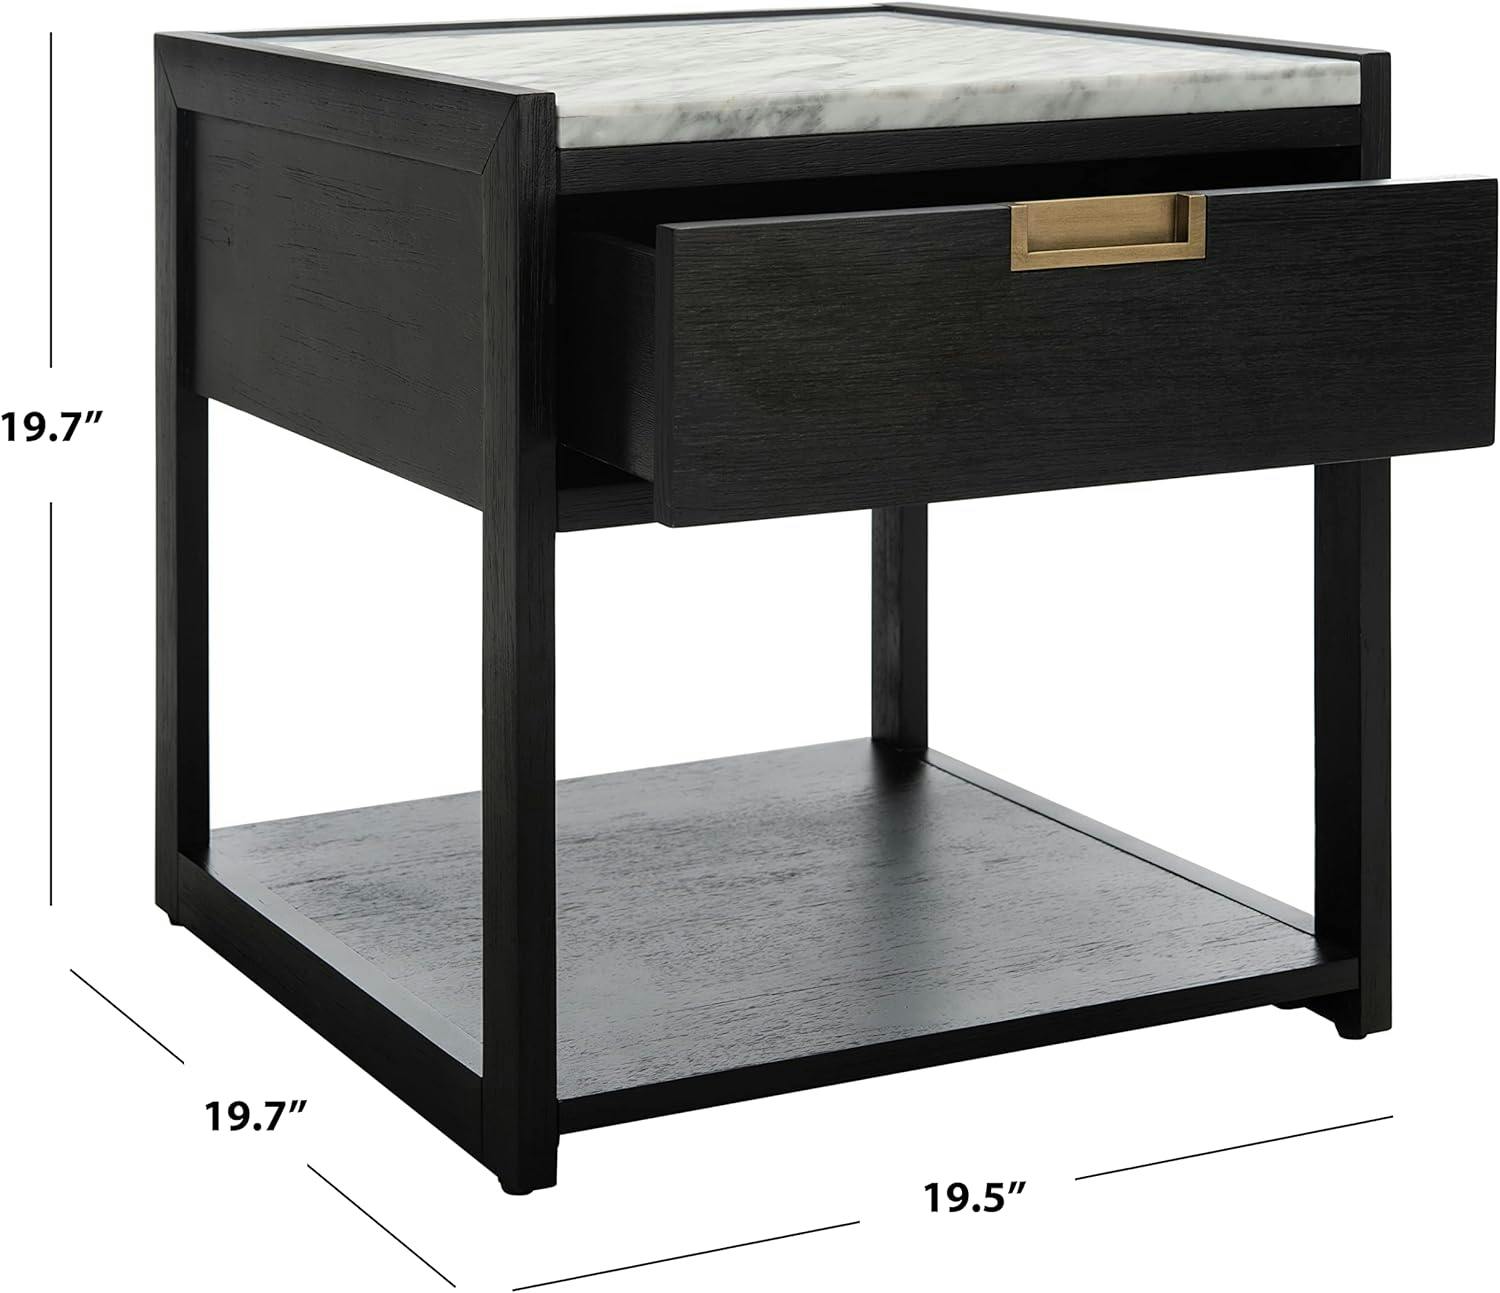 Adeline Black and White Marble Top Nightstand with Antique Brass Handle